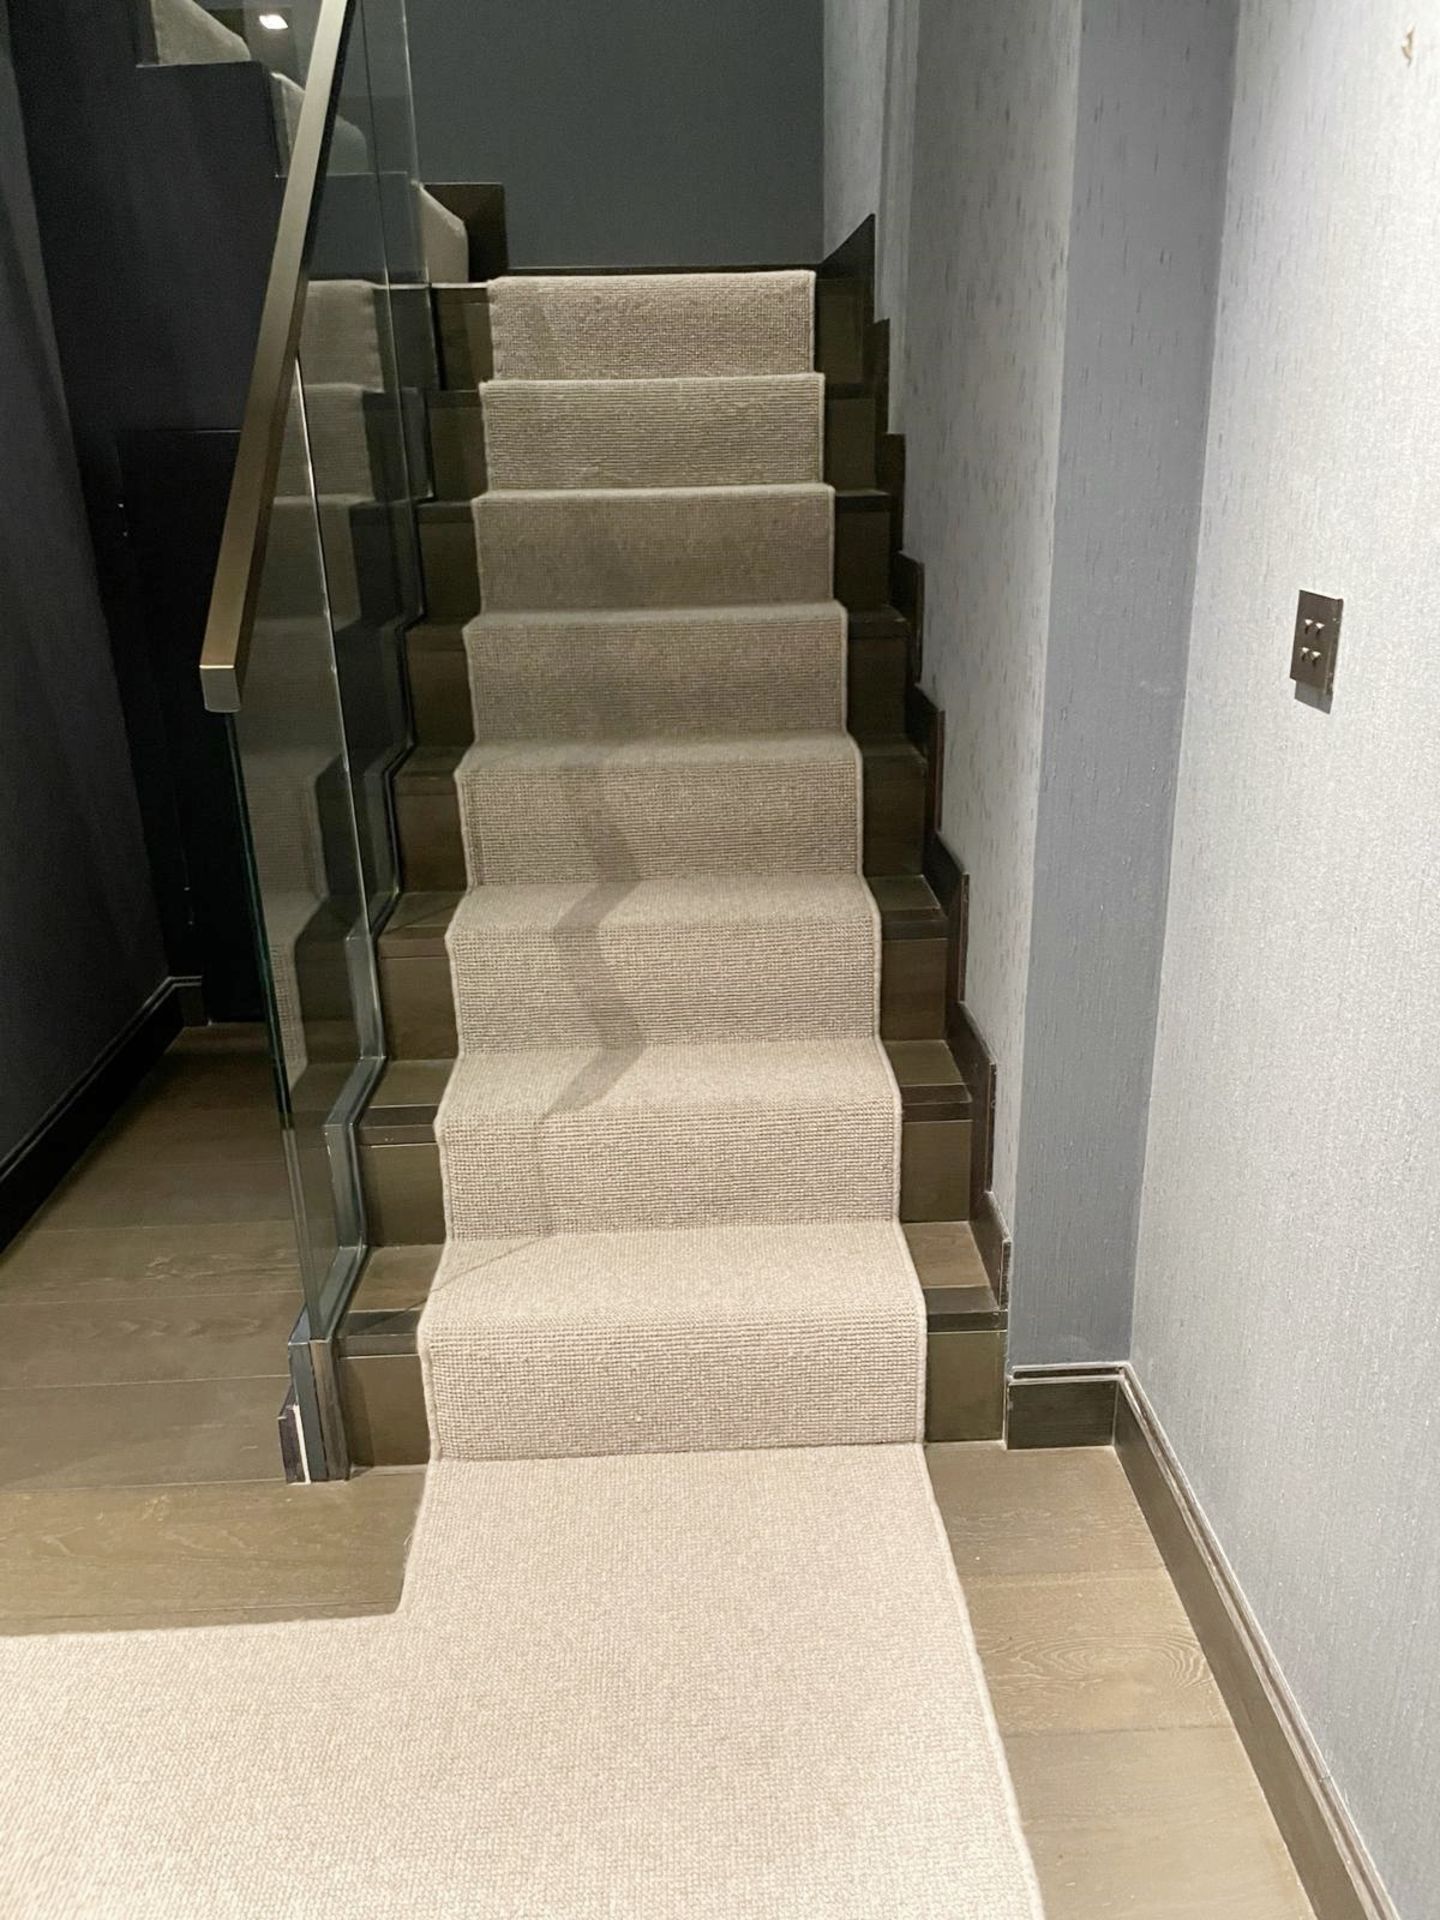 3 x Sections of Premium Woven Stairway Carpets in a Neutral Tone - CL894 - NO VAT ON THE HAMMER - Image 7 of 14